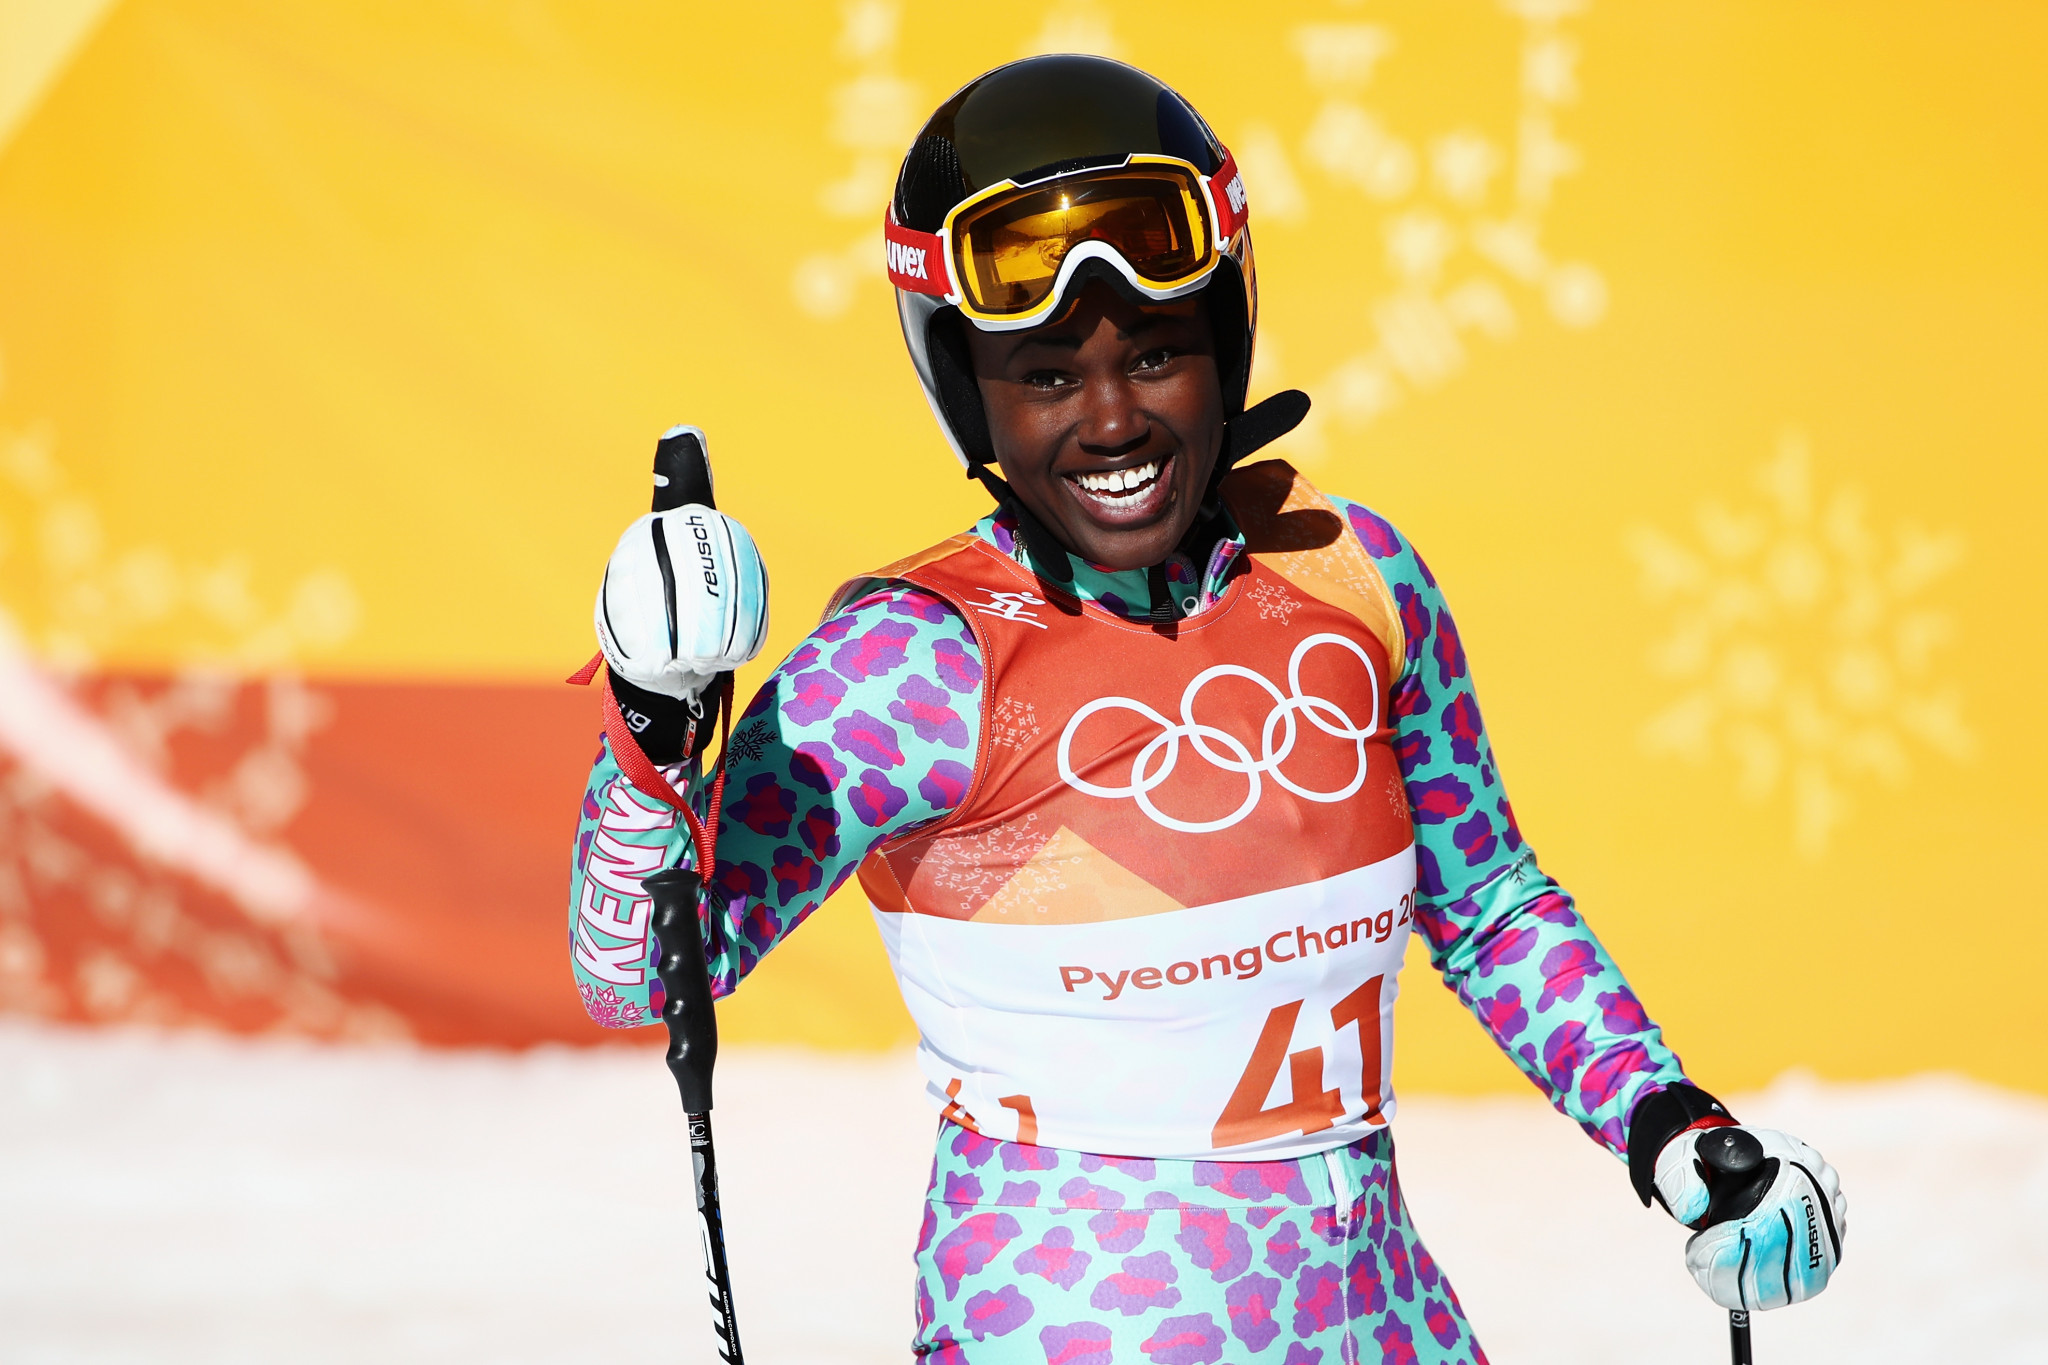 Alpine skier Sabrina Wanjiku Simader has received a boost in her bid to compete at the 2022 Winter Olympics in Beijing ©Getty Images